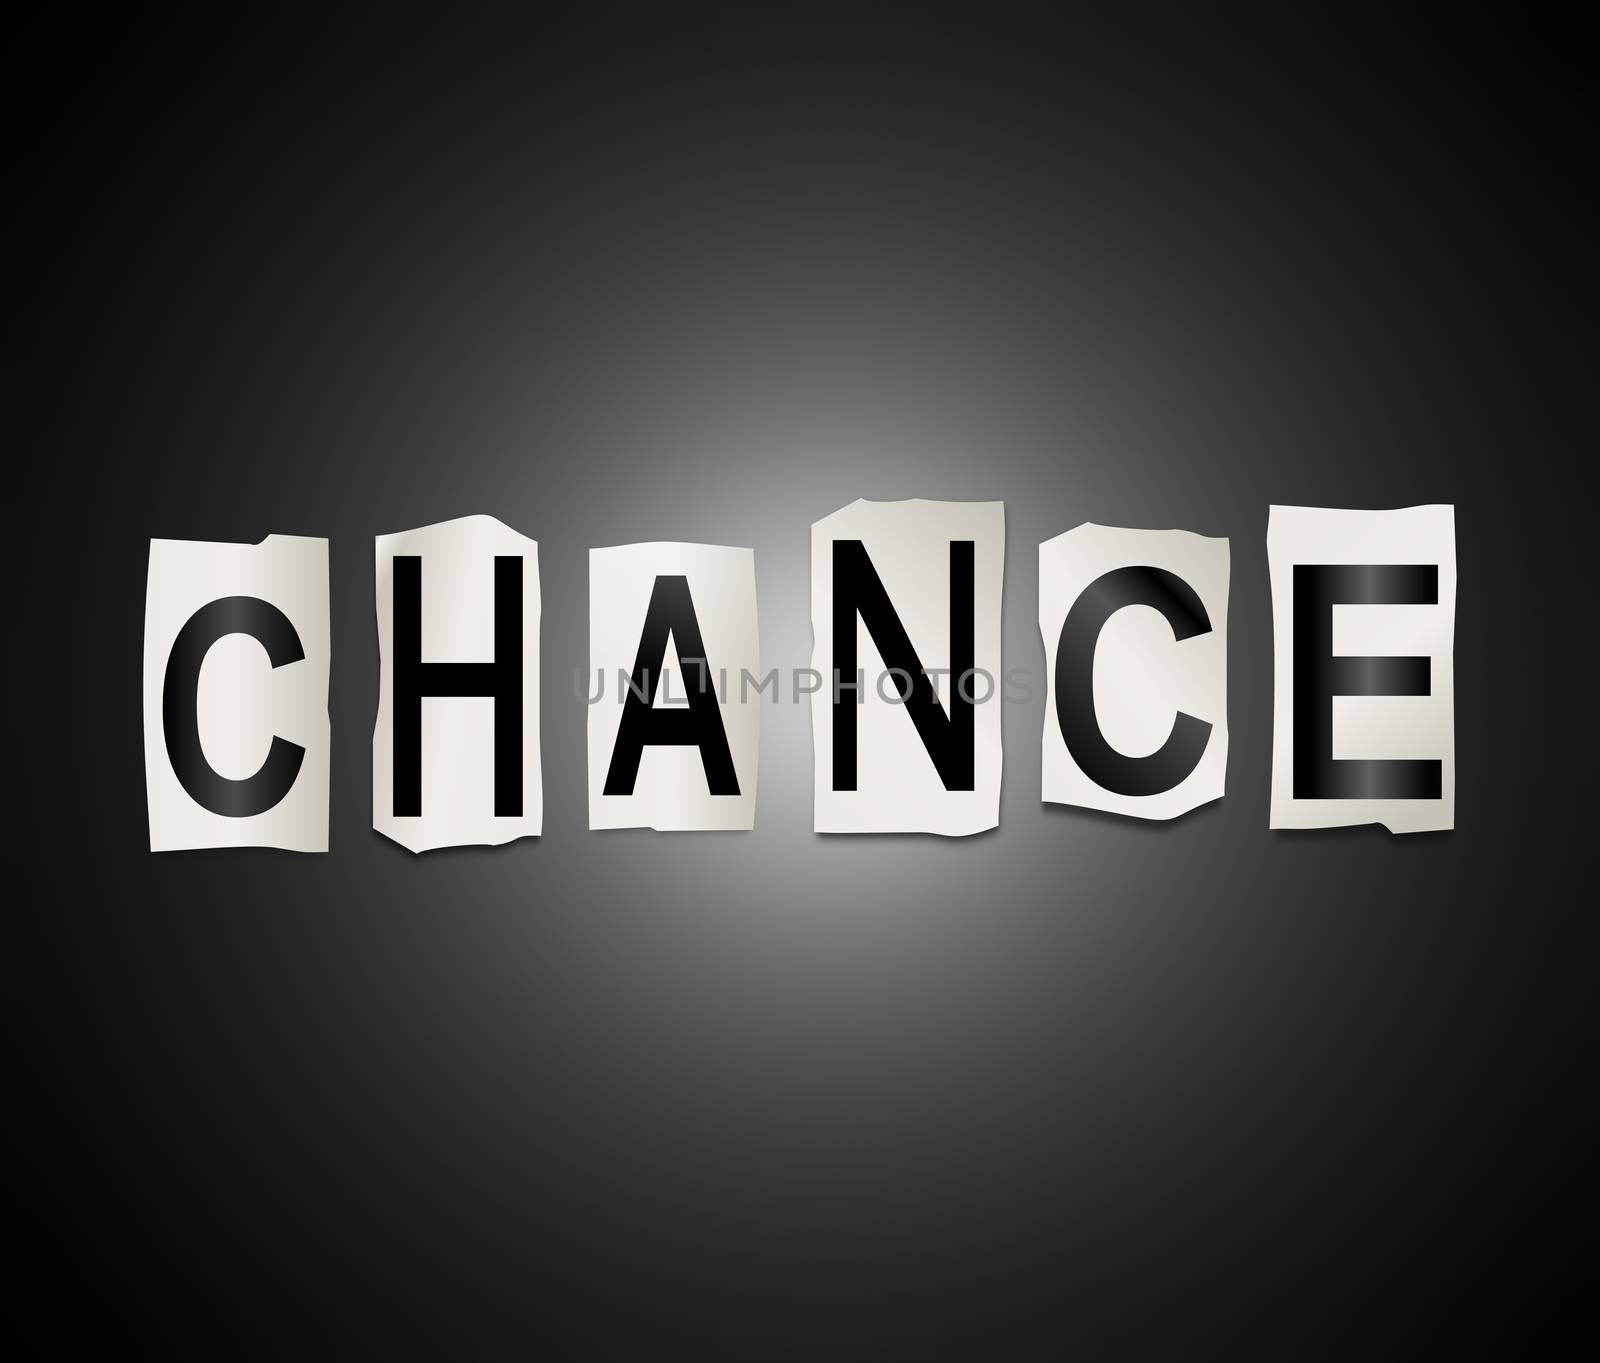 Illustration depicting a set of cut out printed letters arranged to form the word chance.